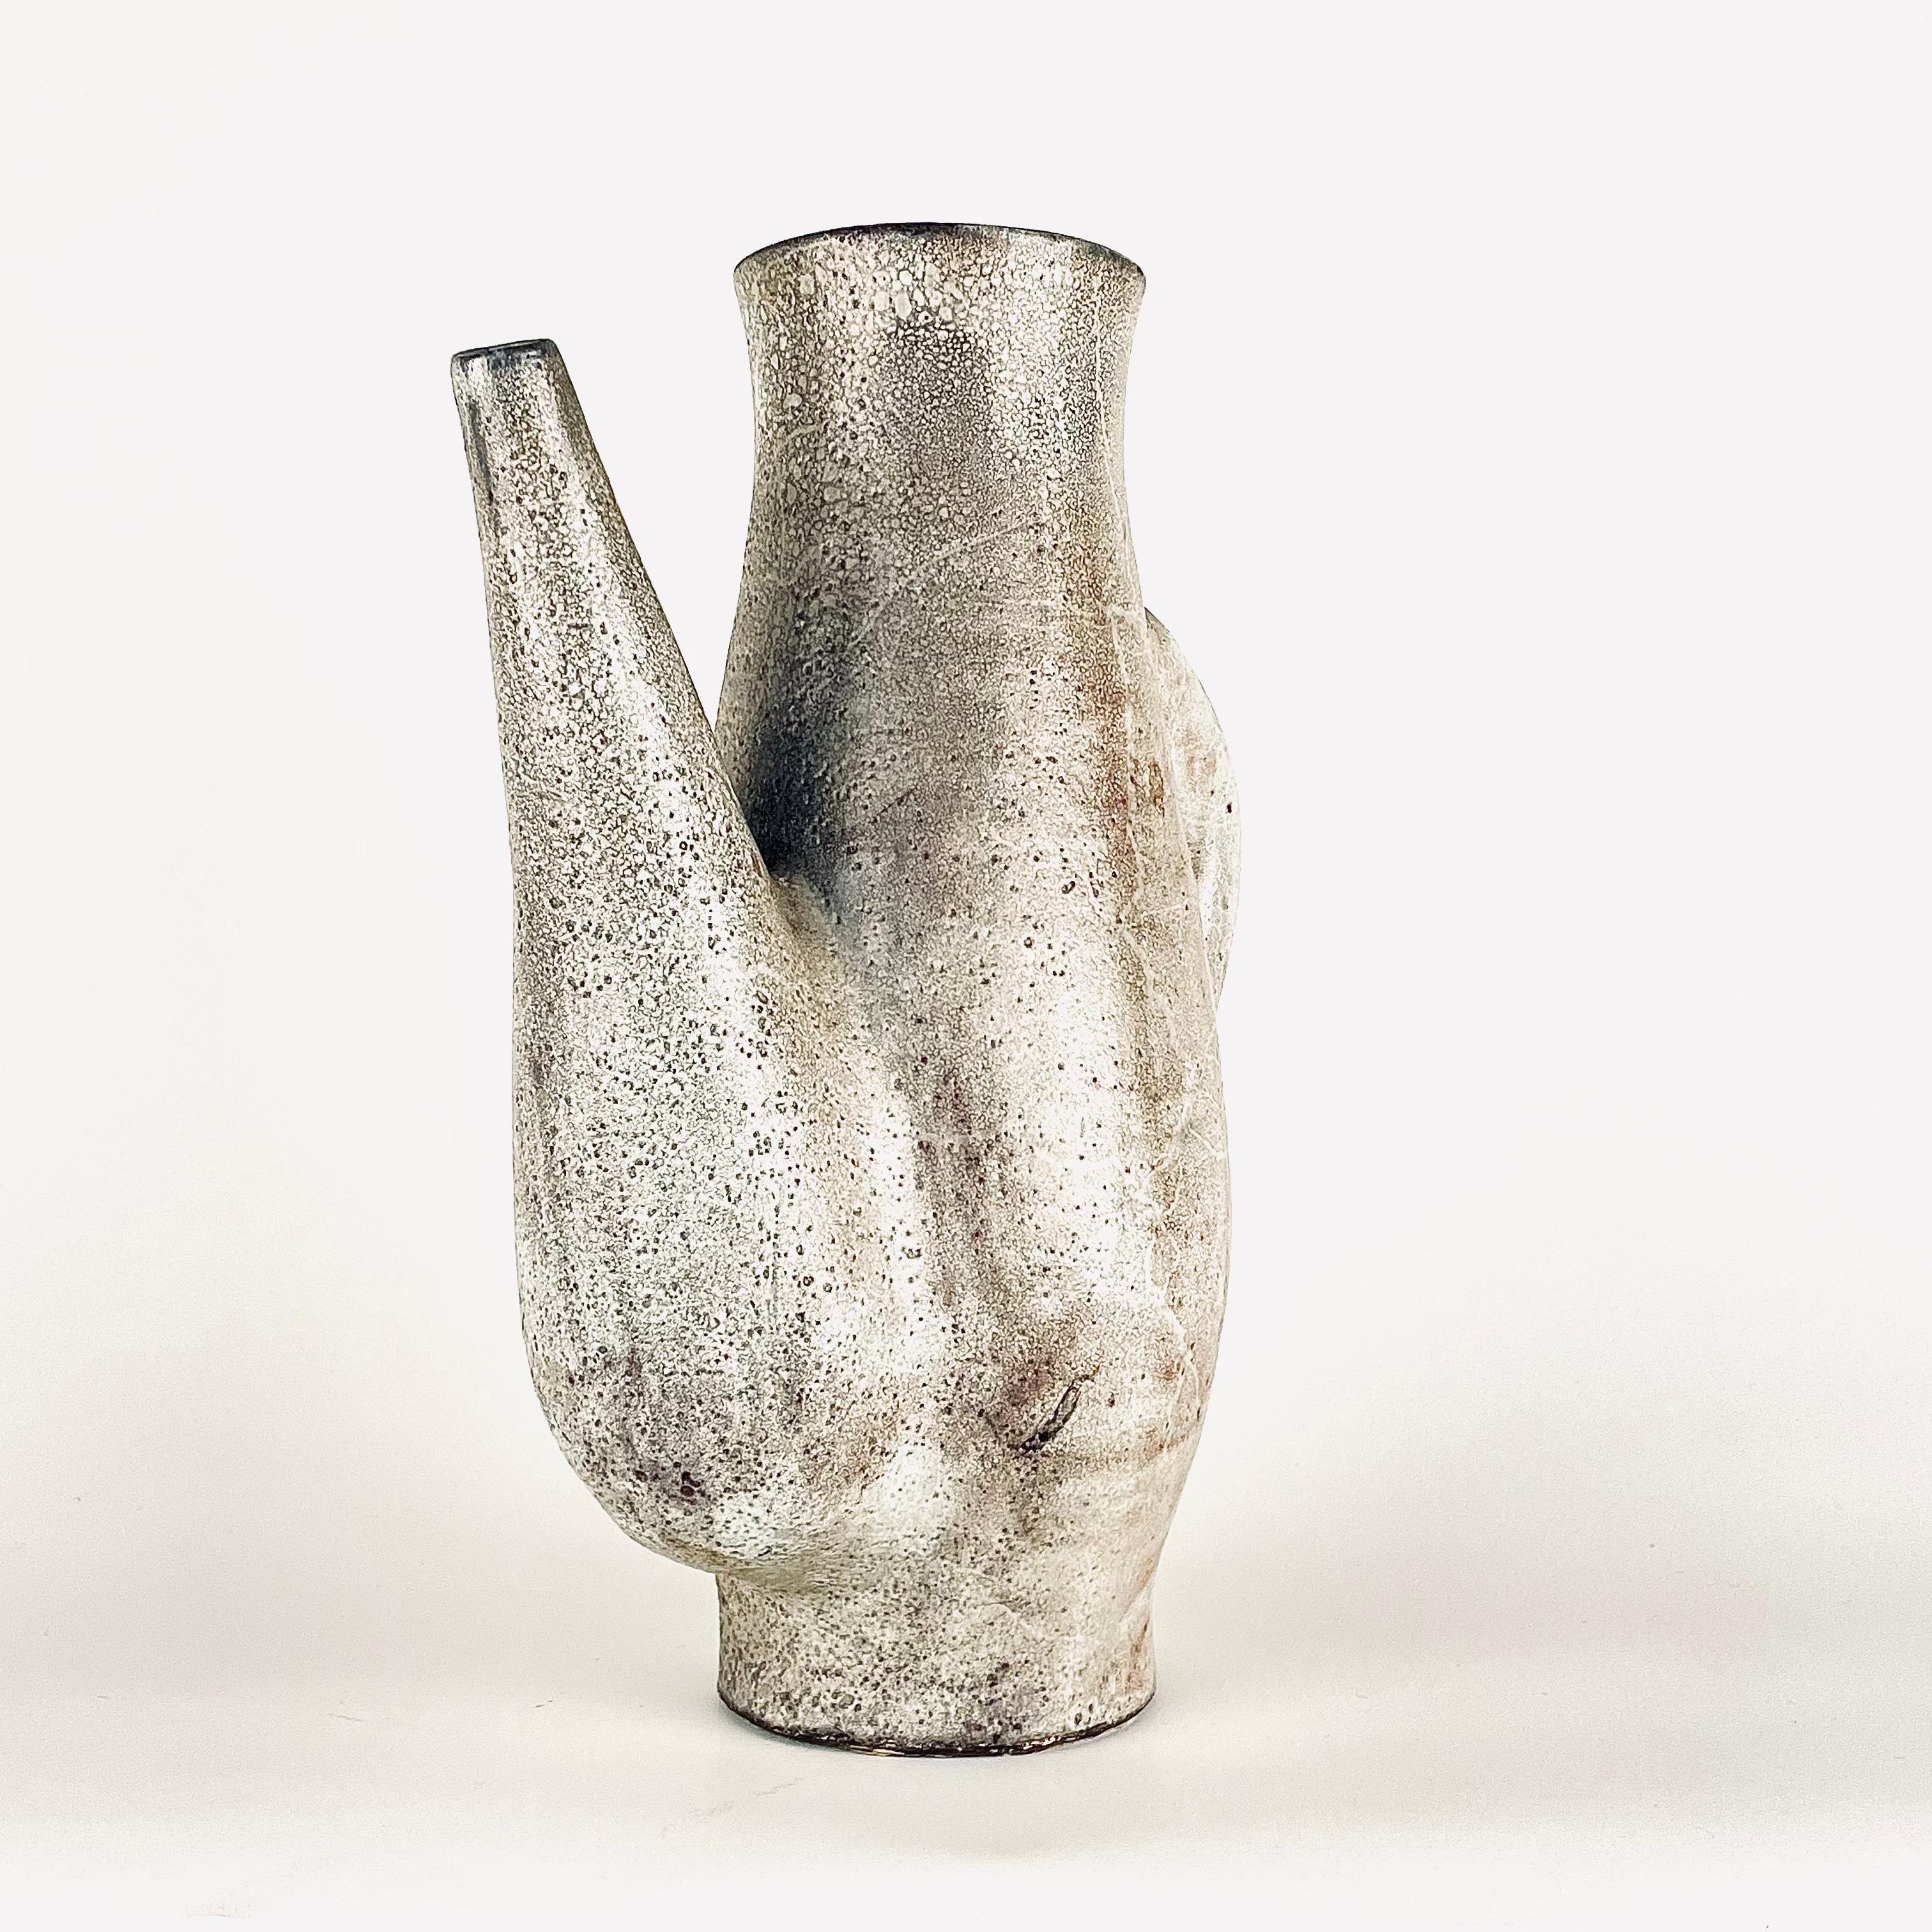 French Ceramic pitcher by Jean Derval, Vallauris, circa 1960